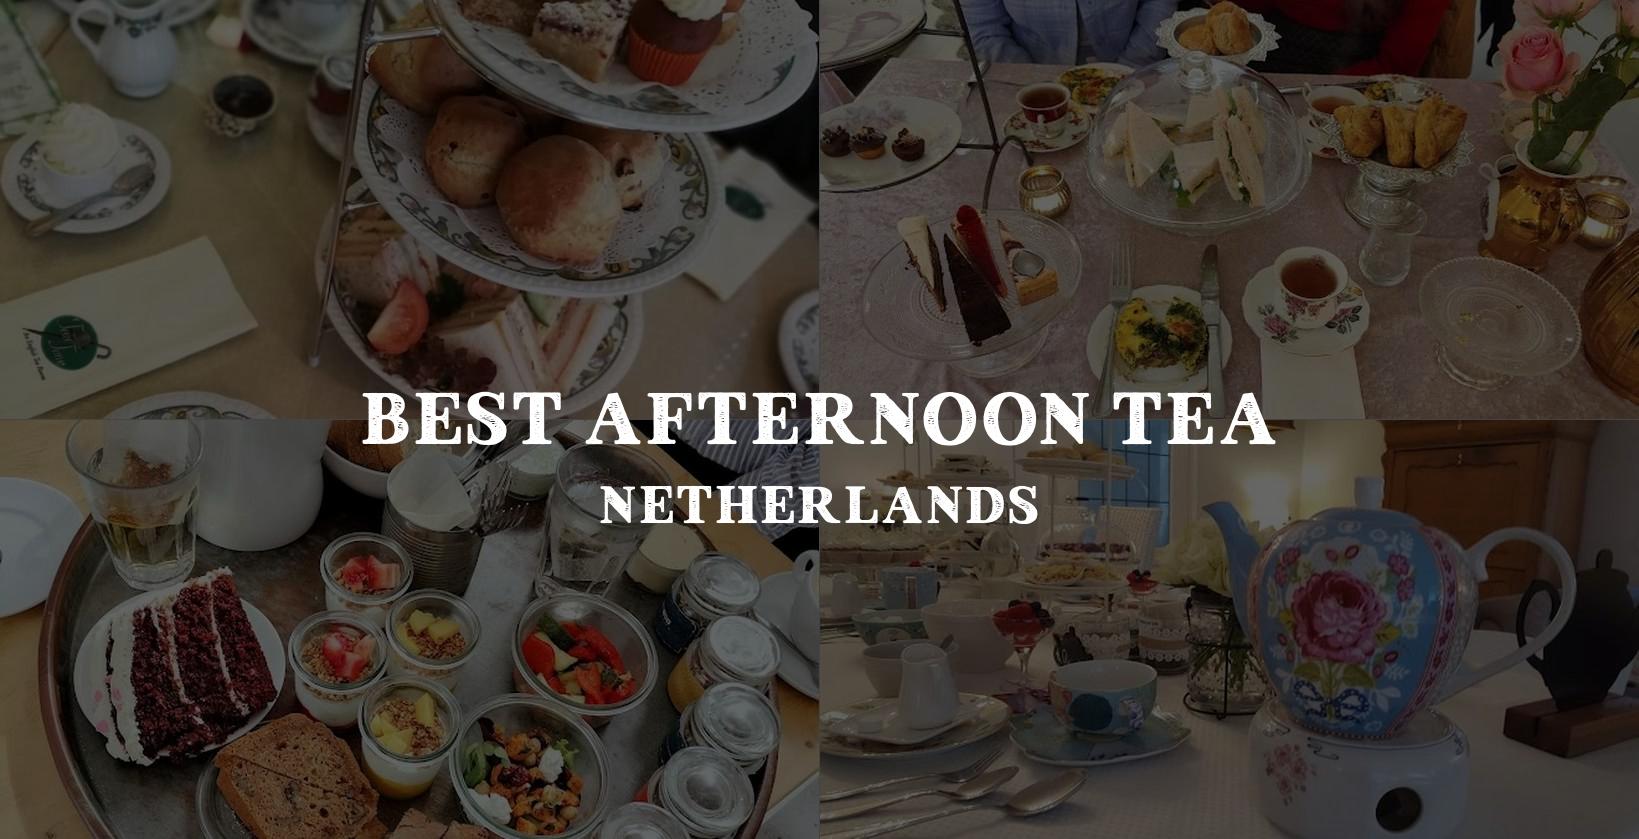 Choosing the perfect spot for afternoon tea in the Netherlands